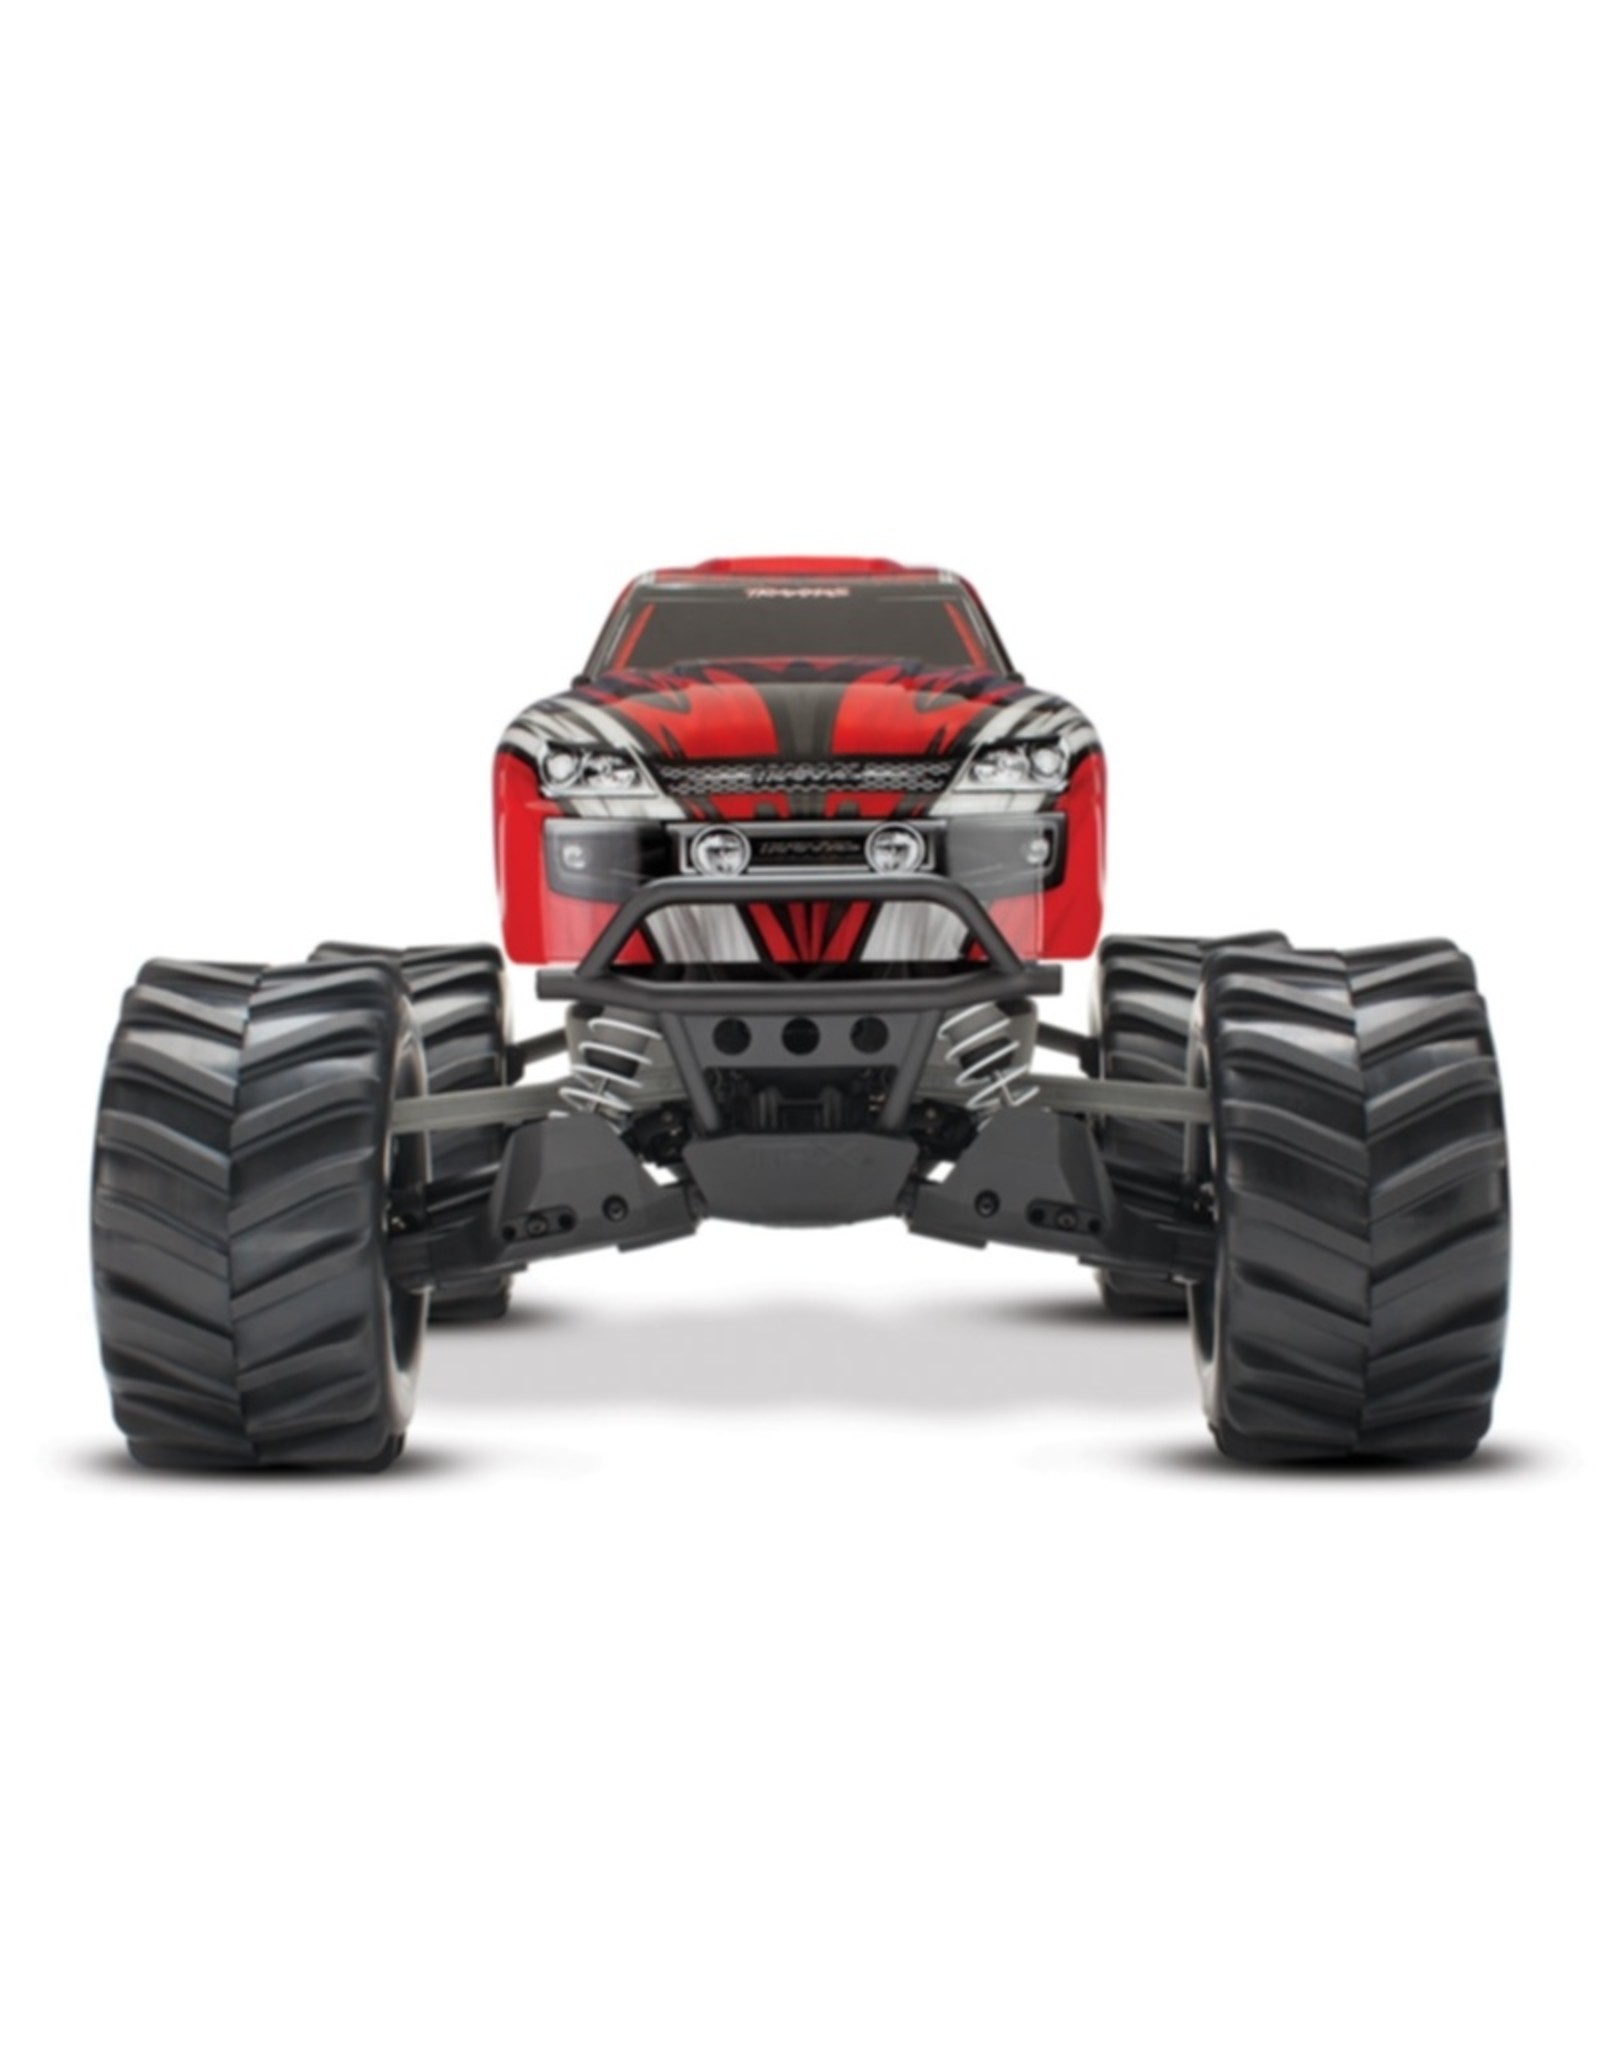 Traxxas TRA67054-1-RED Stampede® 4X4 : 1/10-scale 4WD Monster Truck. Ready-To-Race® with TQ 2.4GHz radio system and XL-5 ESC (fwd/rev). Includes: 7-Cell NiMH 3000mAh Traxxas® batte